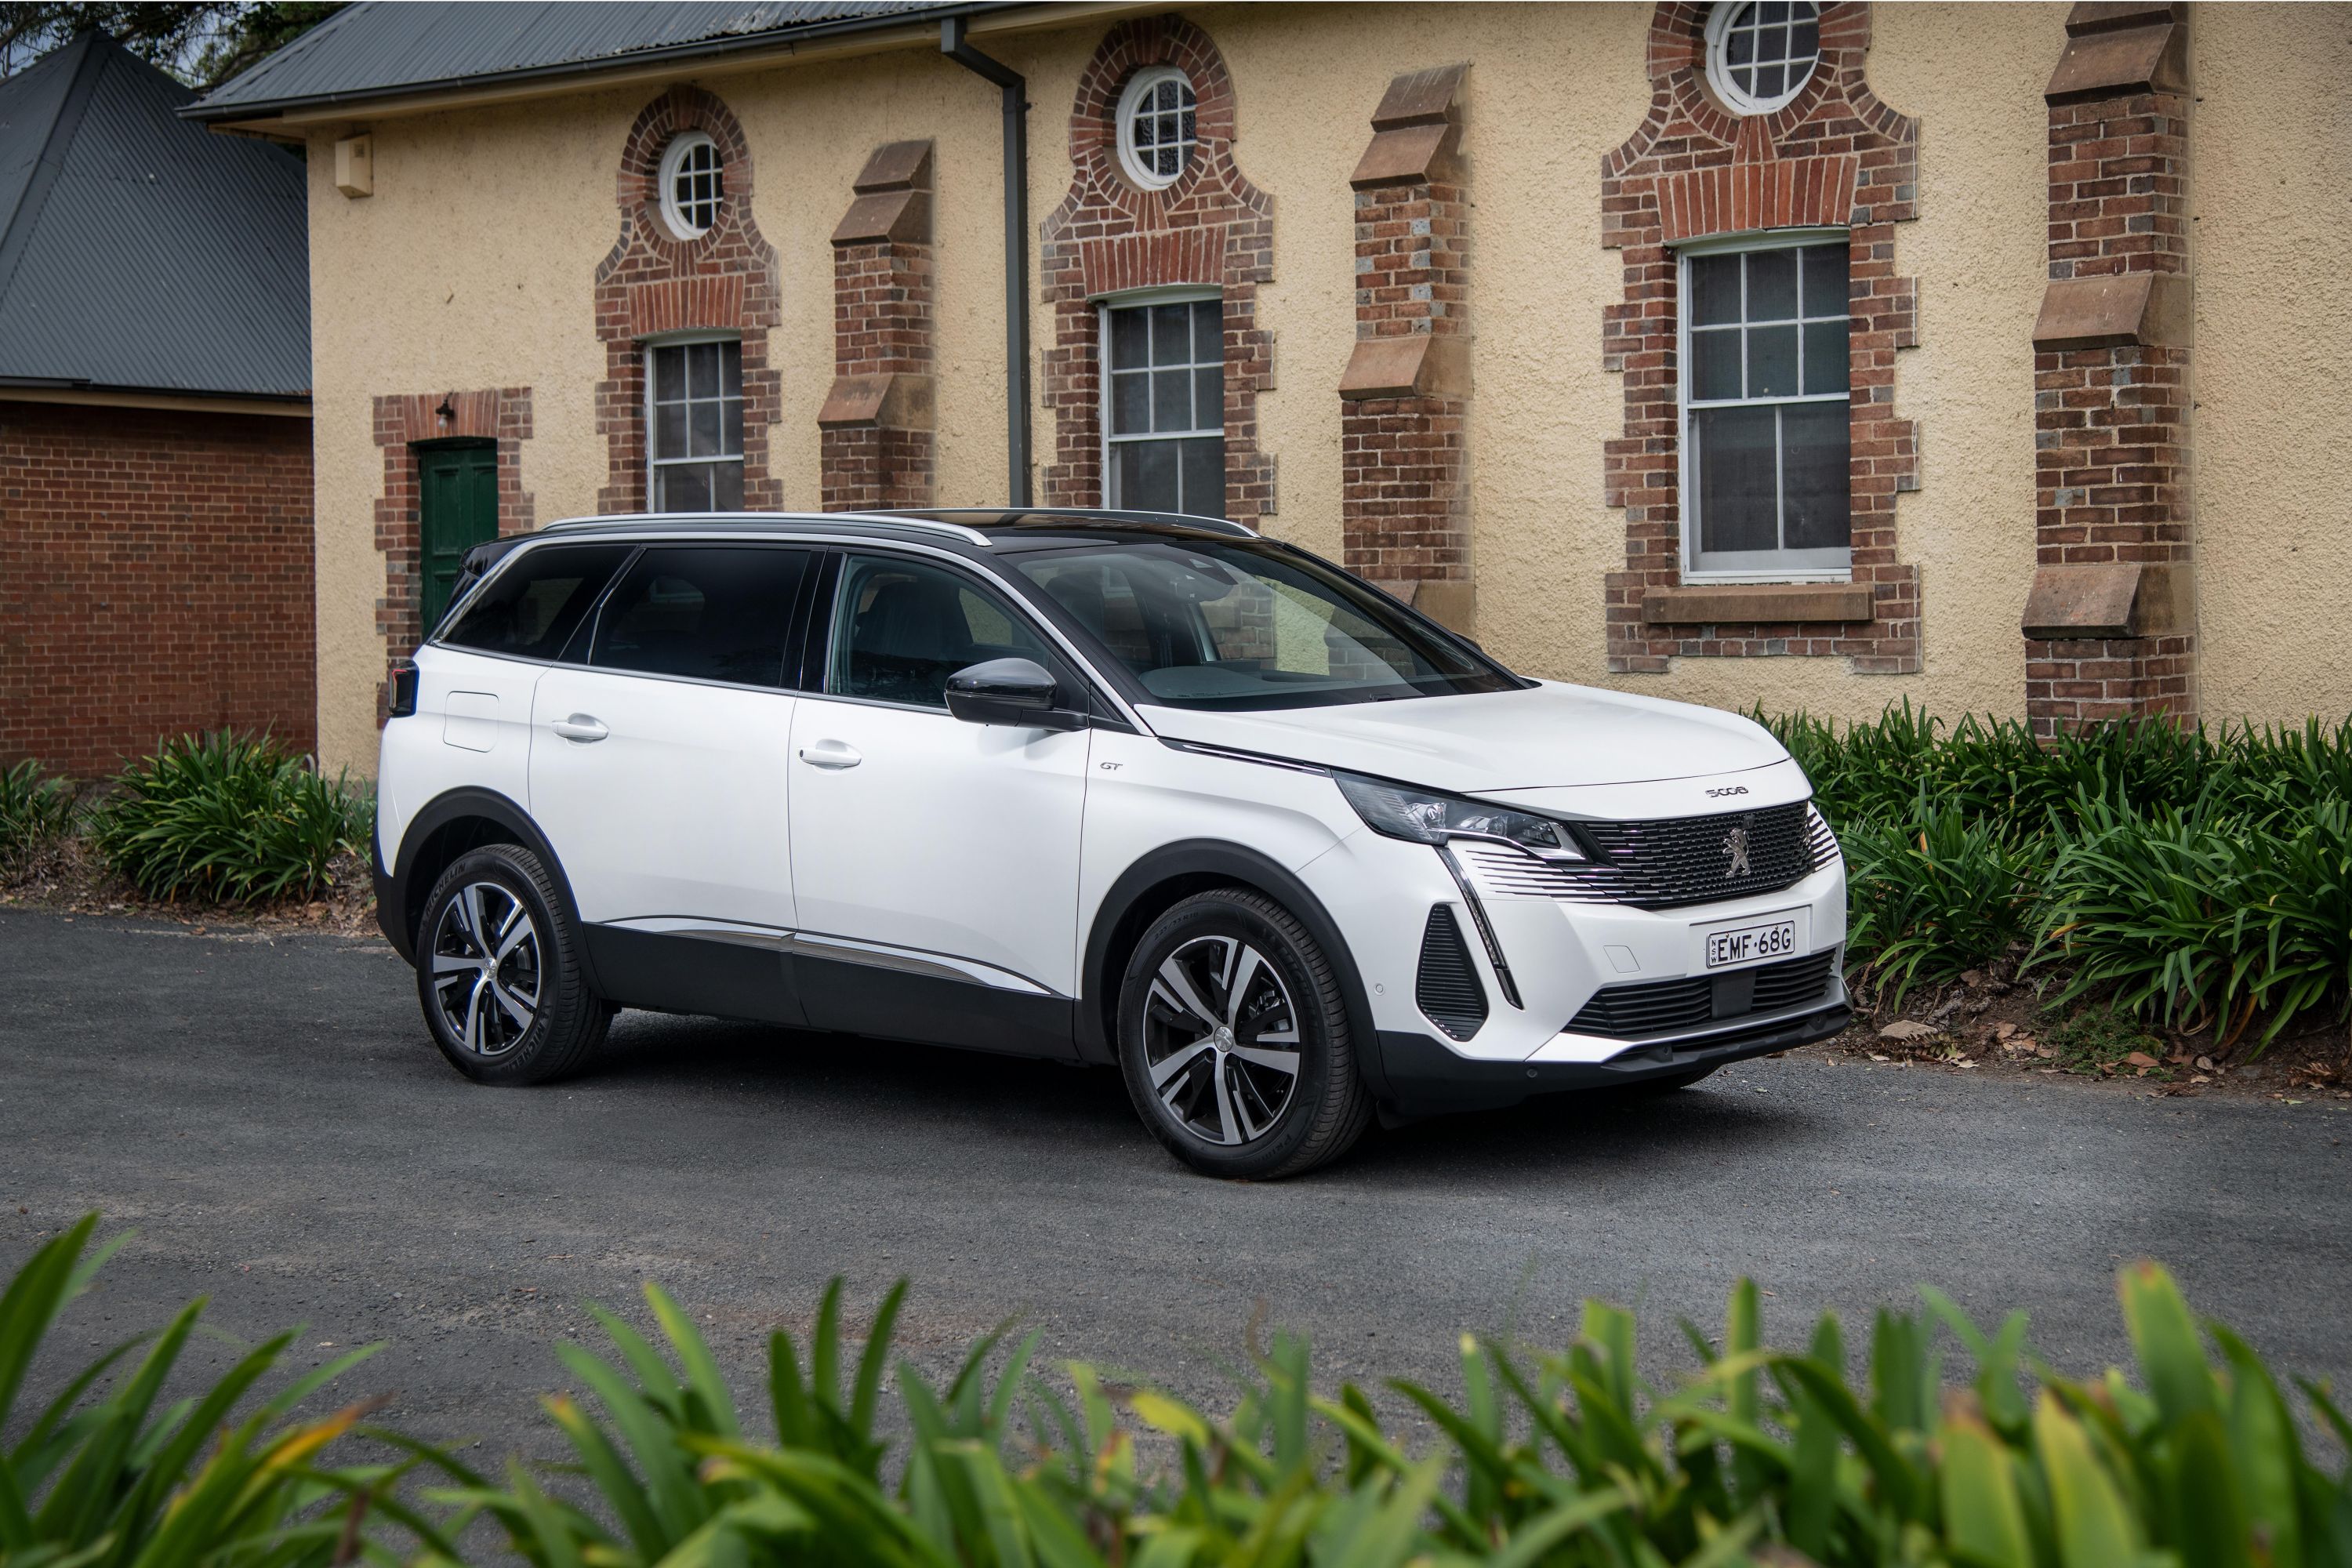 Peugeot 5008 Review, Interior, Colours, For Sale & News in Australia